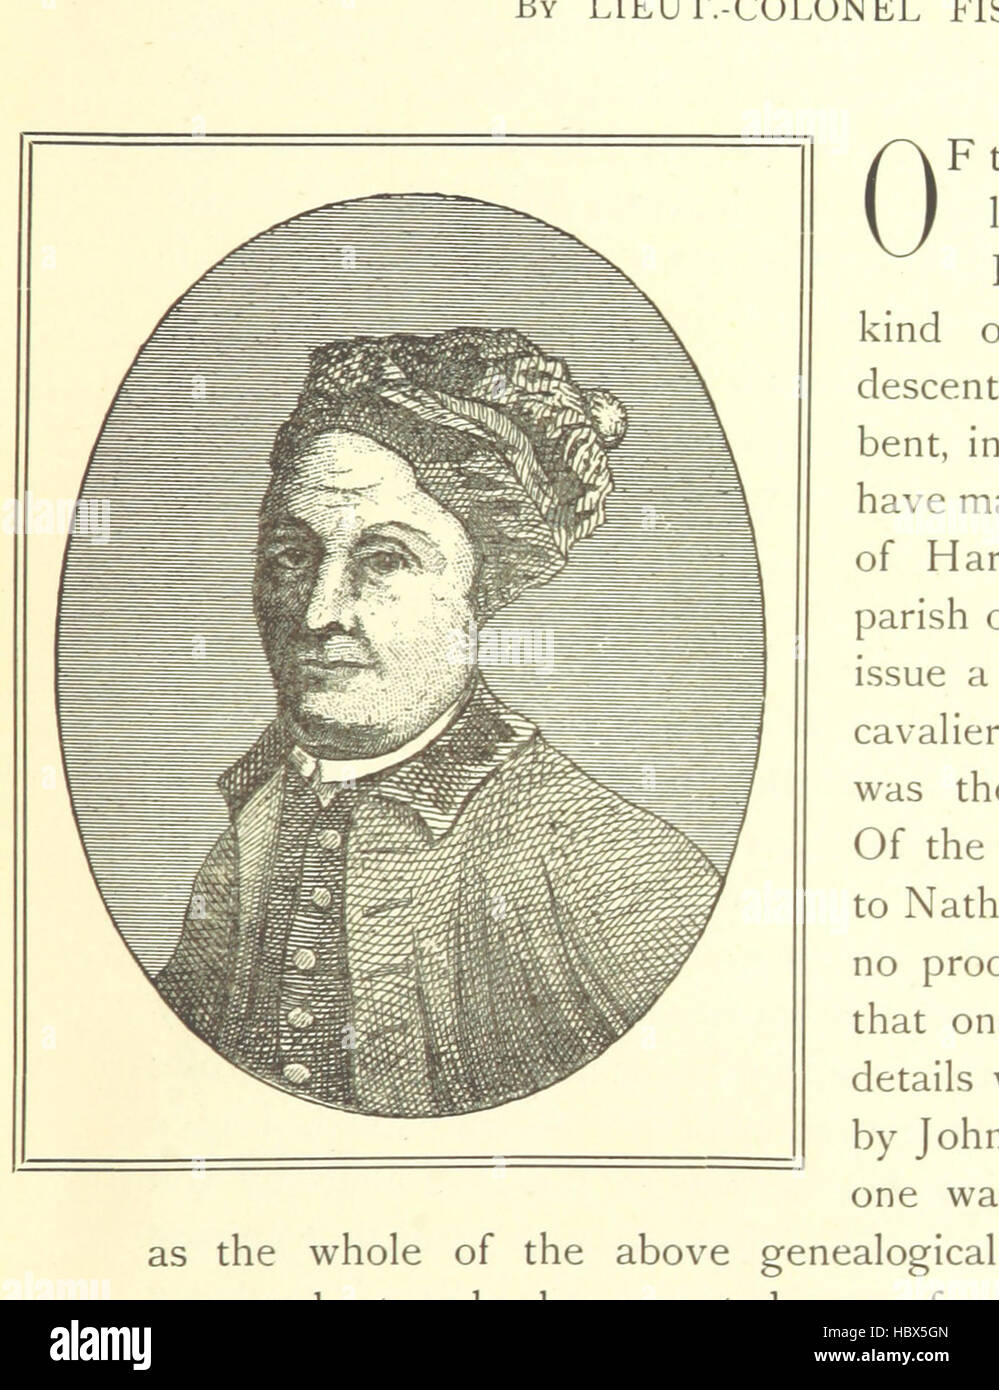 The Works of John Collier-Tim Bobbin-in prose and verse. Edited, with a life of the author, by Lieut.-Colonel Henry Fishwick Image taken from page 15 of 'The Works of John Stock Photo